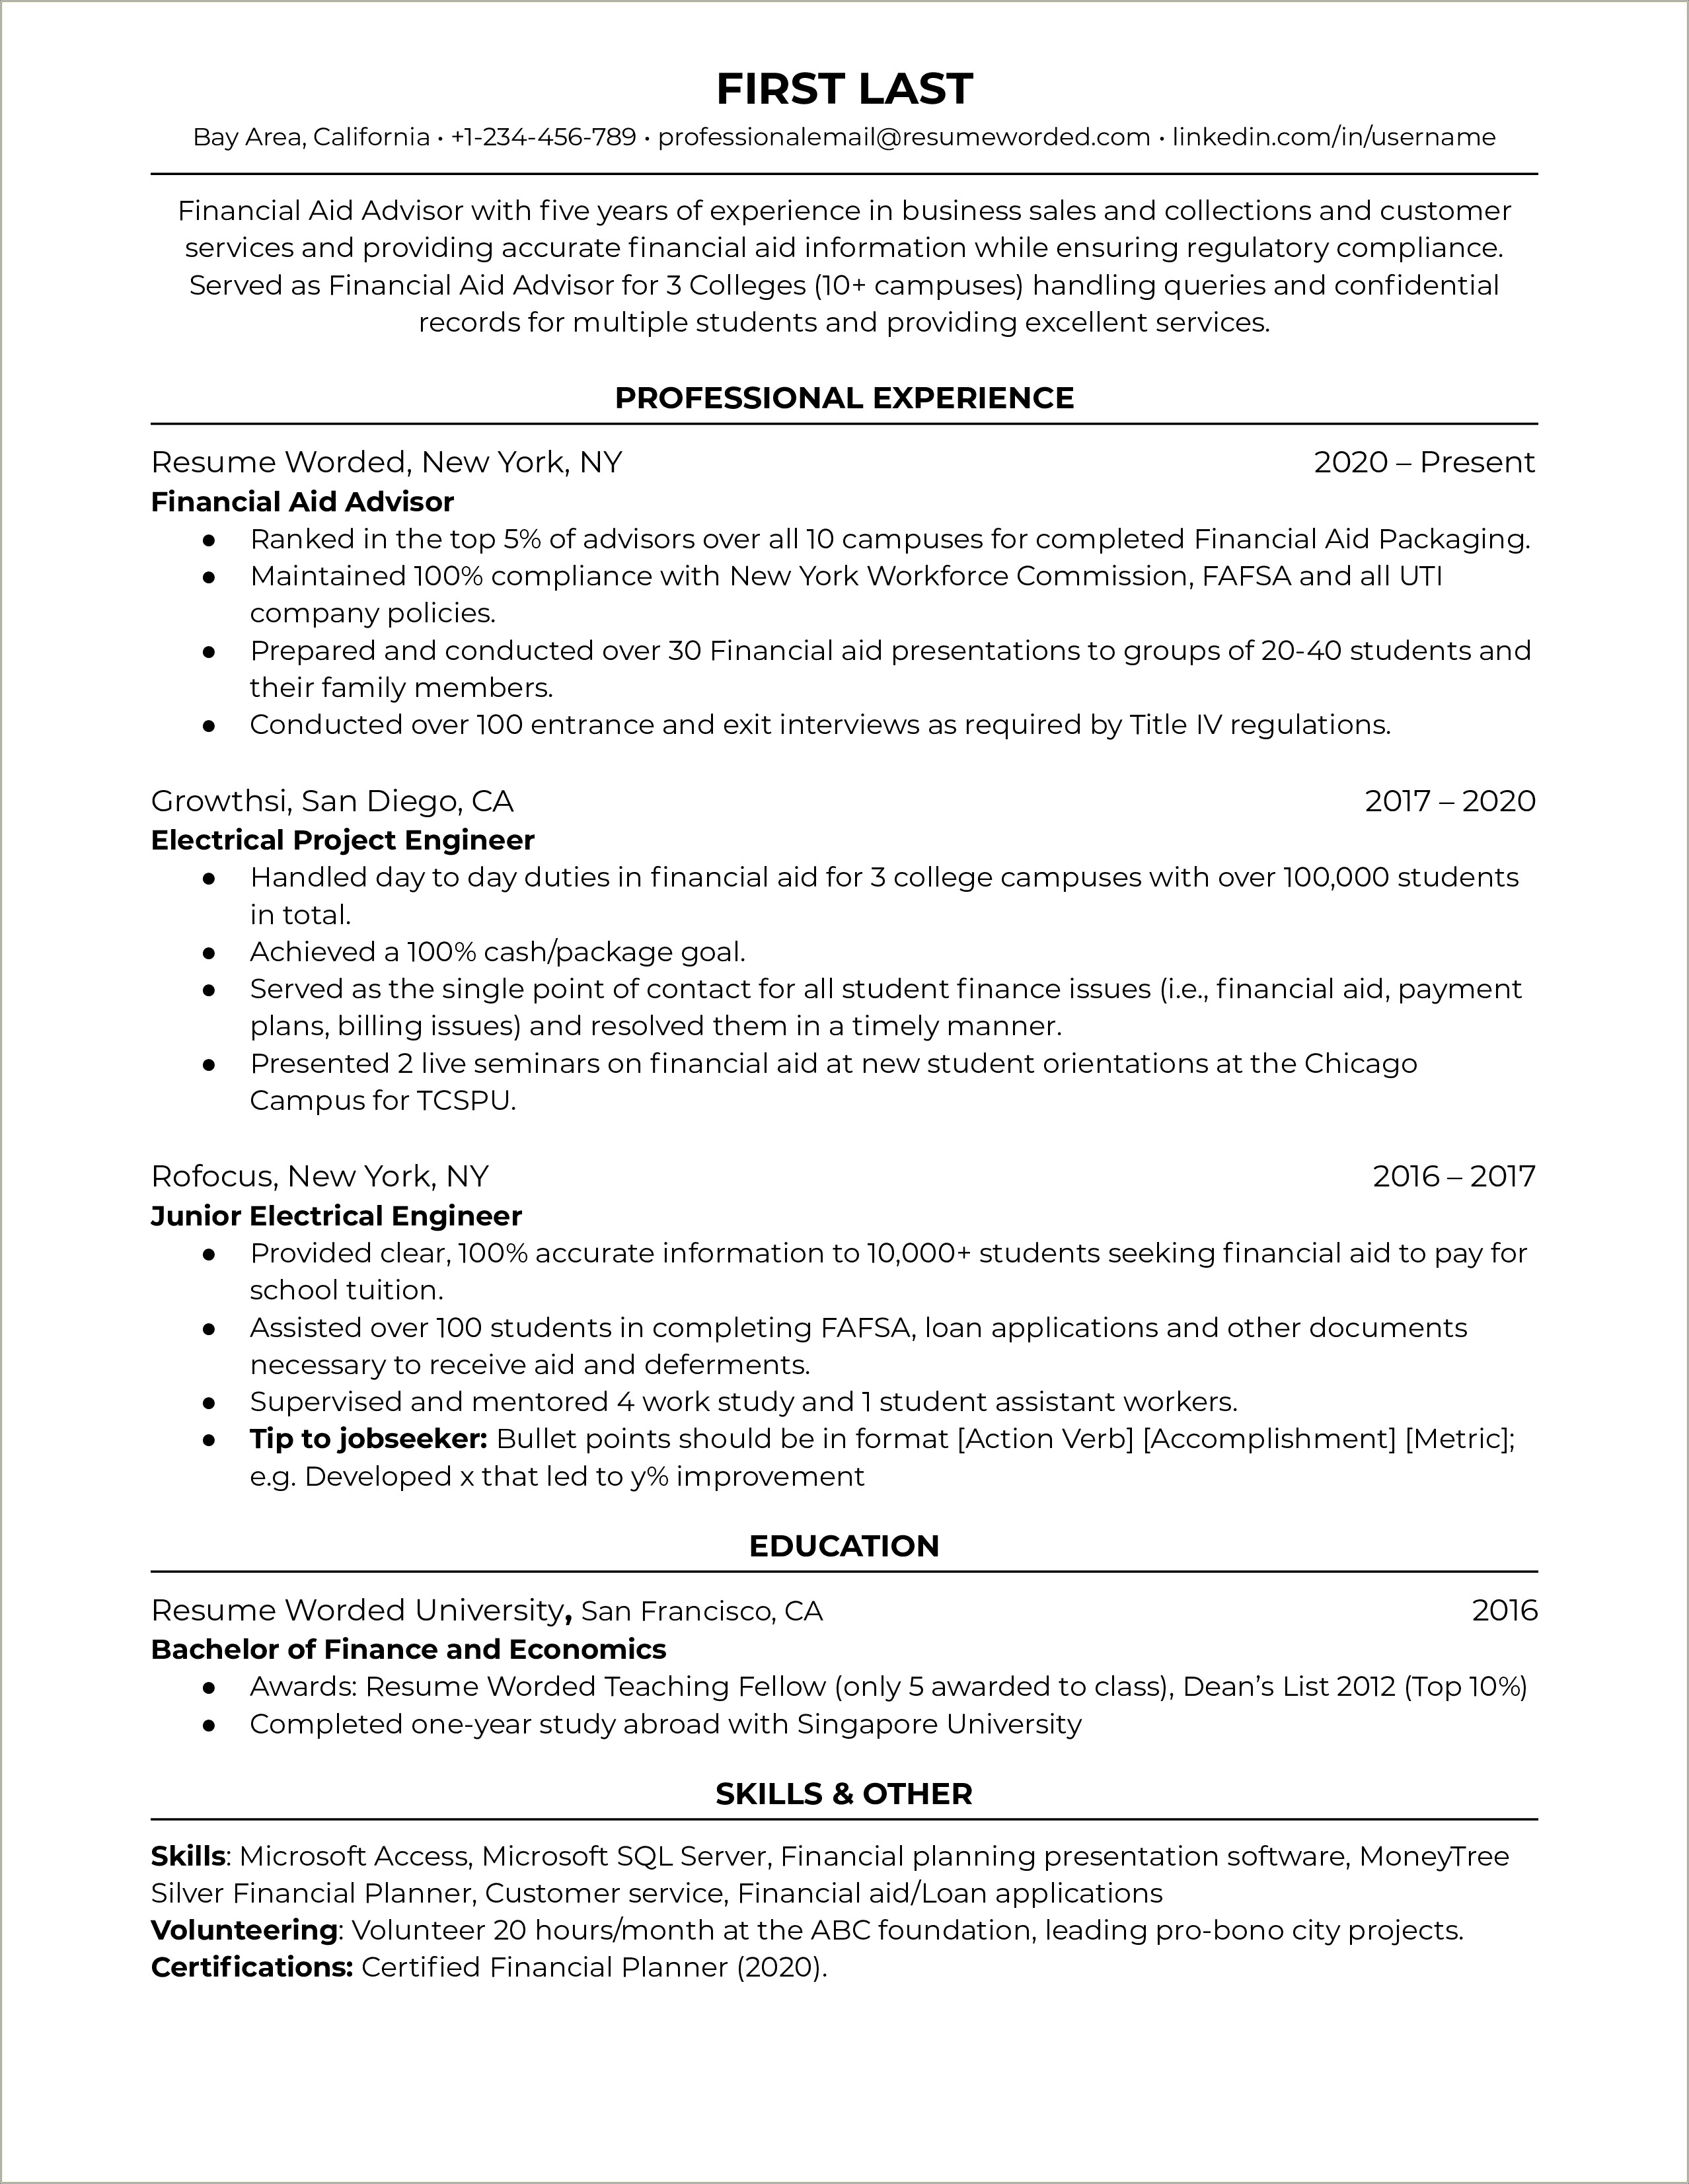 Resume Examples In Finance Trackid Sp 006